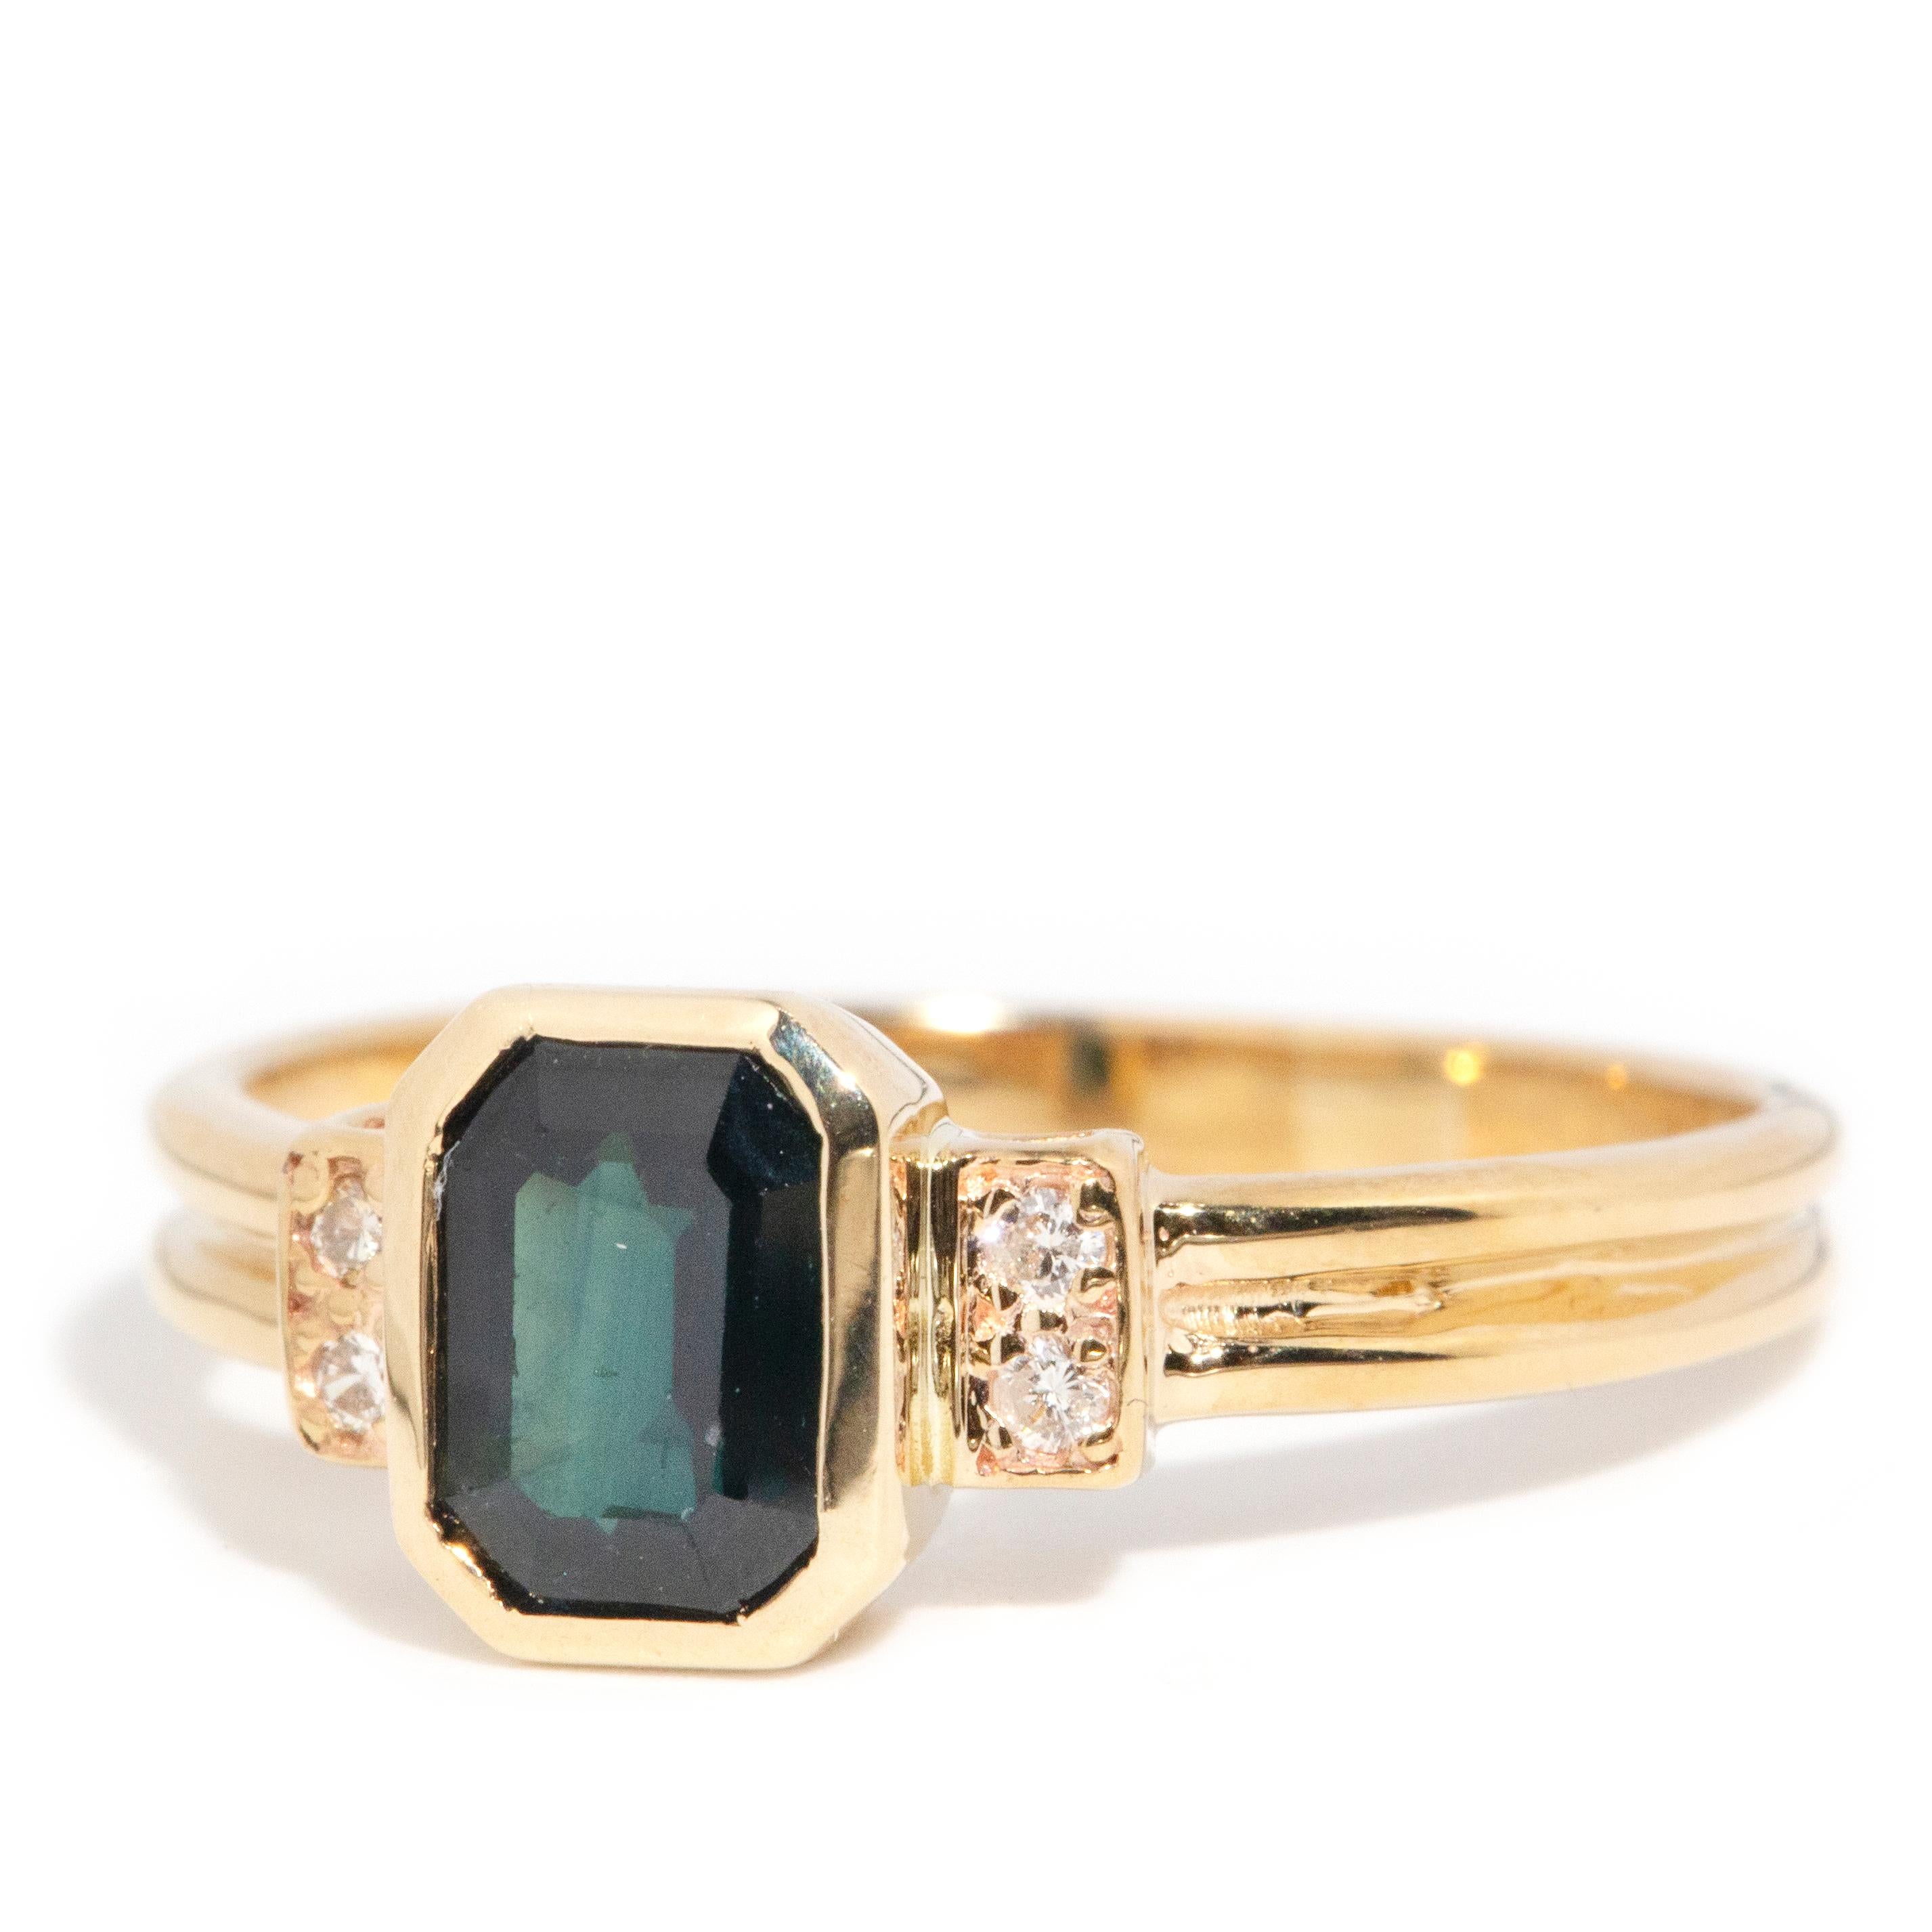 Vintage 1990s 9 Carat Yellow Gold Emerald Cut Teal Sapphire and Diamond Ring 4